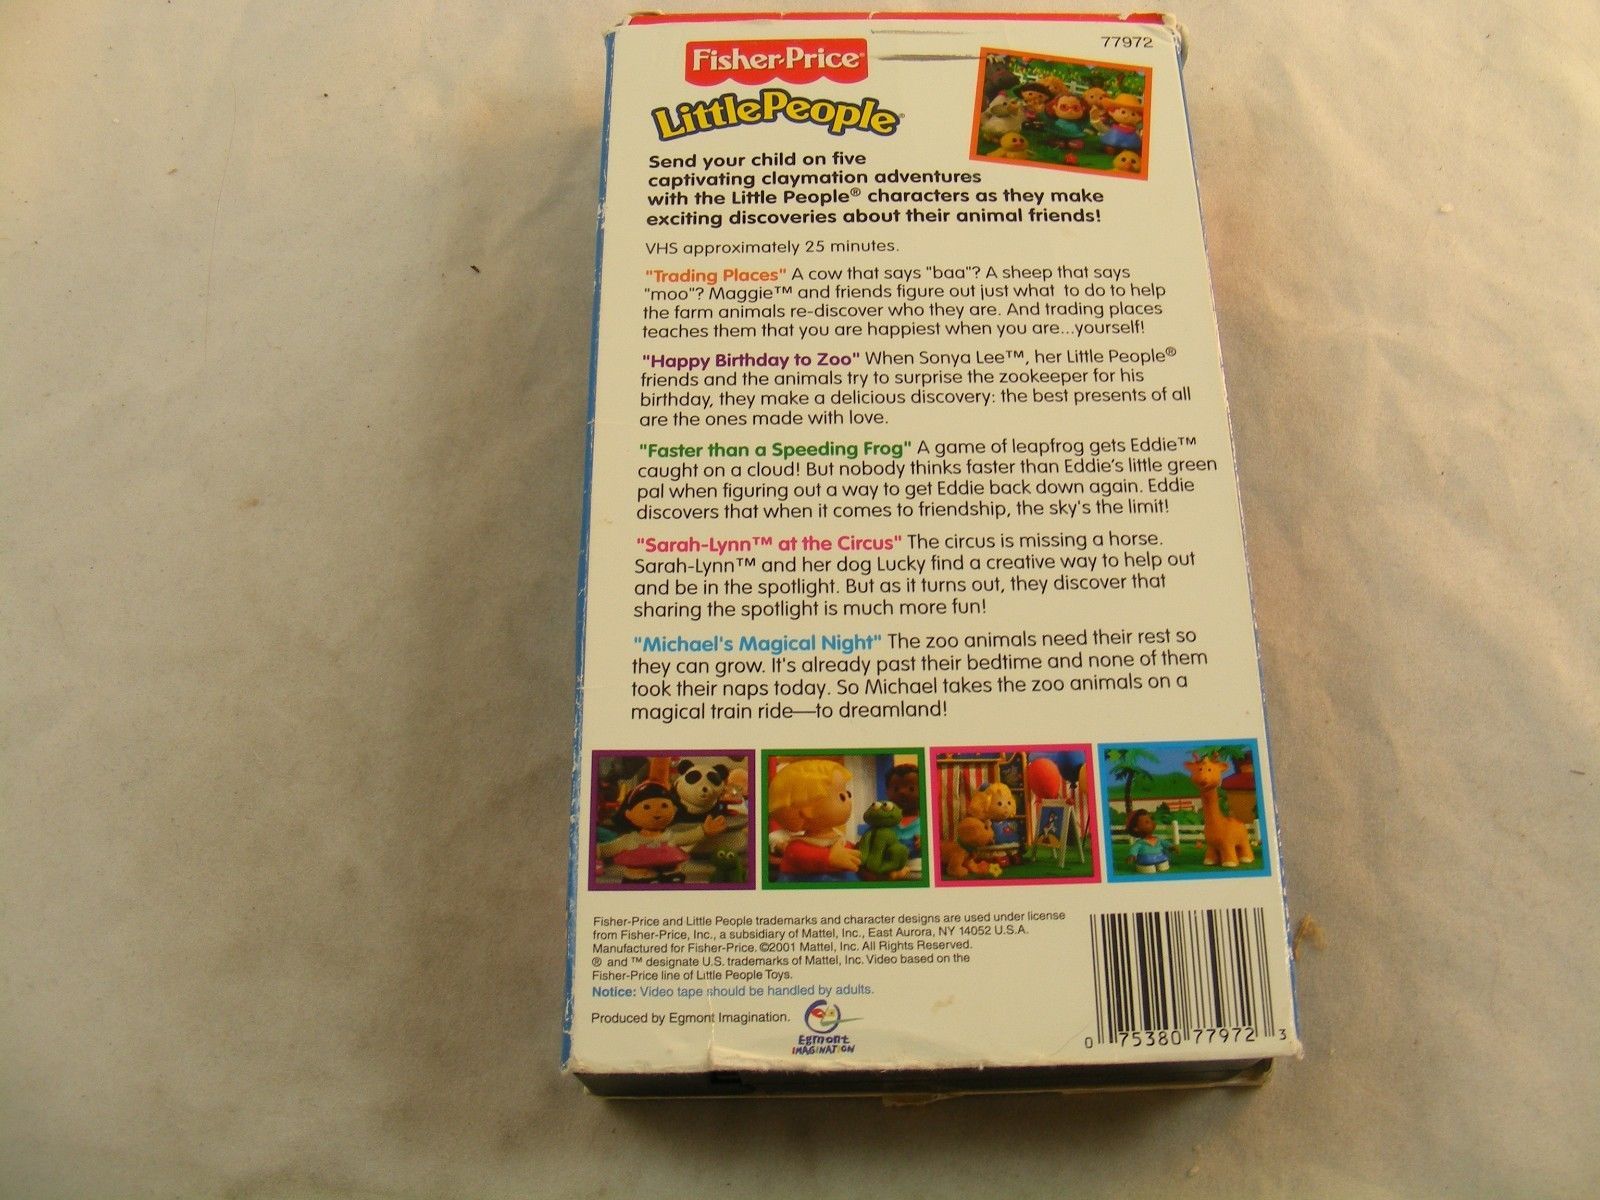 Fisher-Price Little People VHS - Volume 3: and 20 similar items